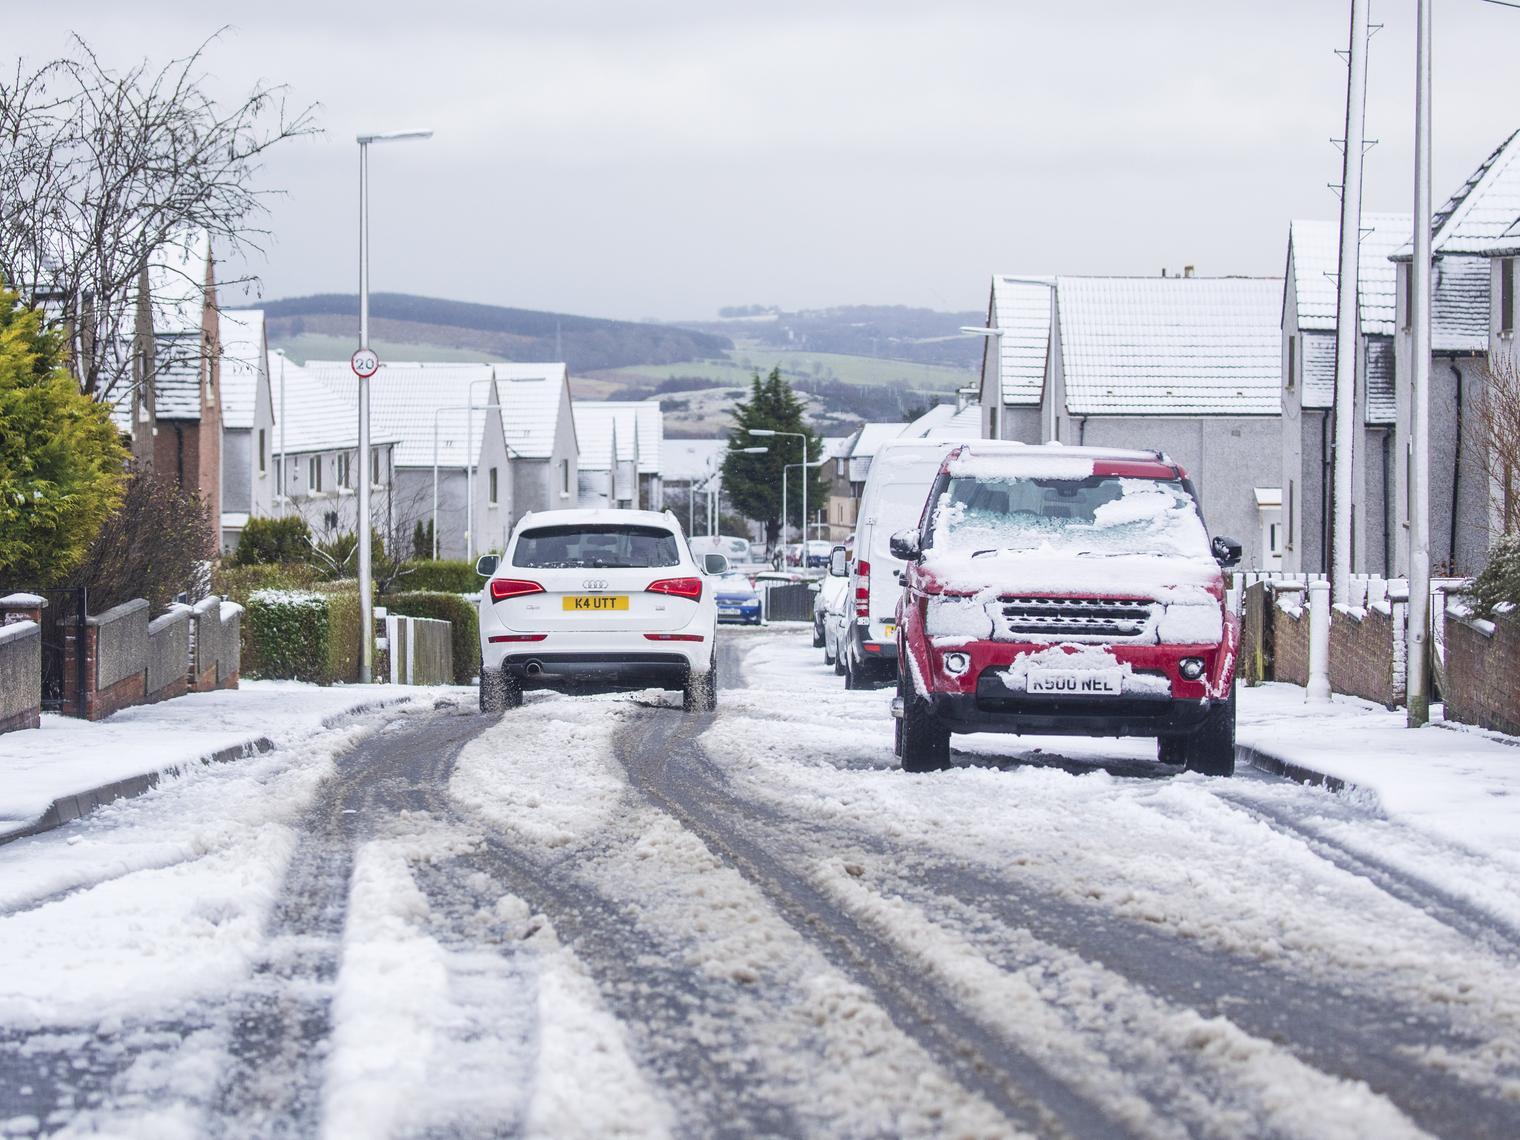 Kelty in Fife saw a fair bit of snow. Pic: Katielee Arrowsmith/SWNS